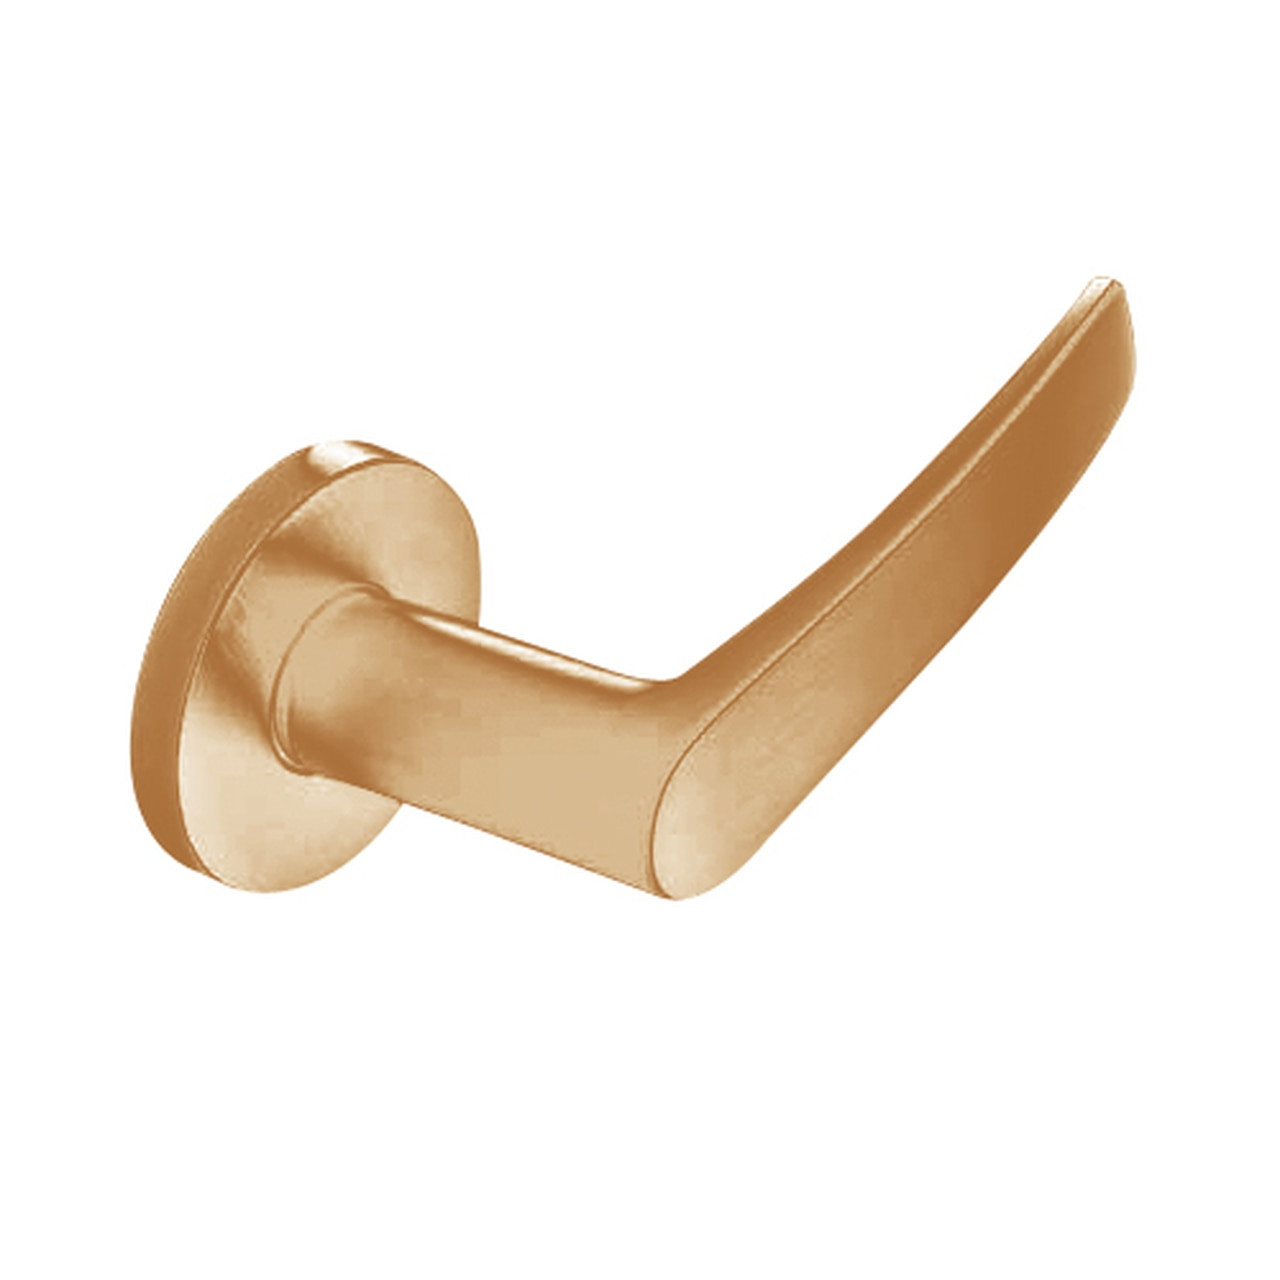 ML2057-ASB-612-LC Corbin Russwin ML2000 Series Mortise Storeroom Locksets with Armstrong Lever in Satin Bronze